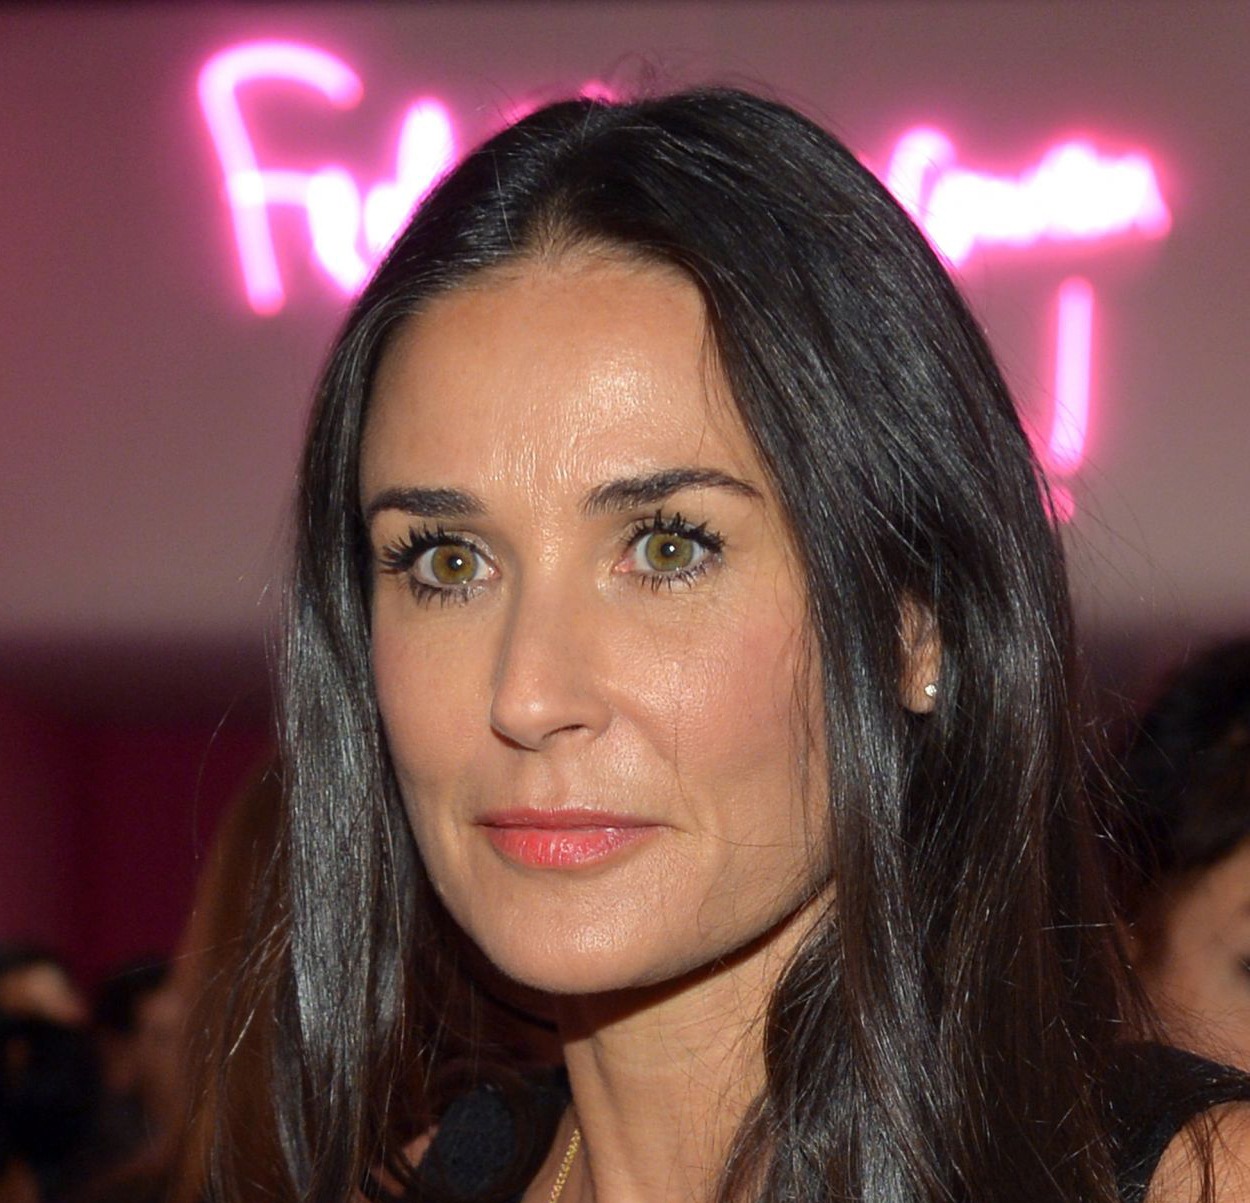 Demi Moore Facelift Plastic Surgery Before and After | Celebie